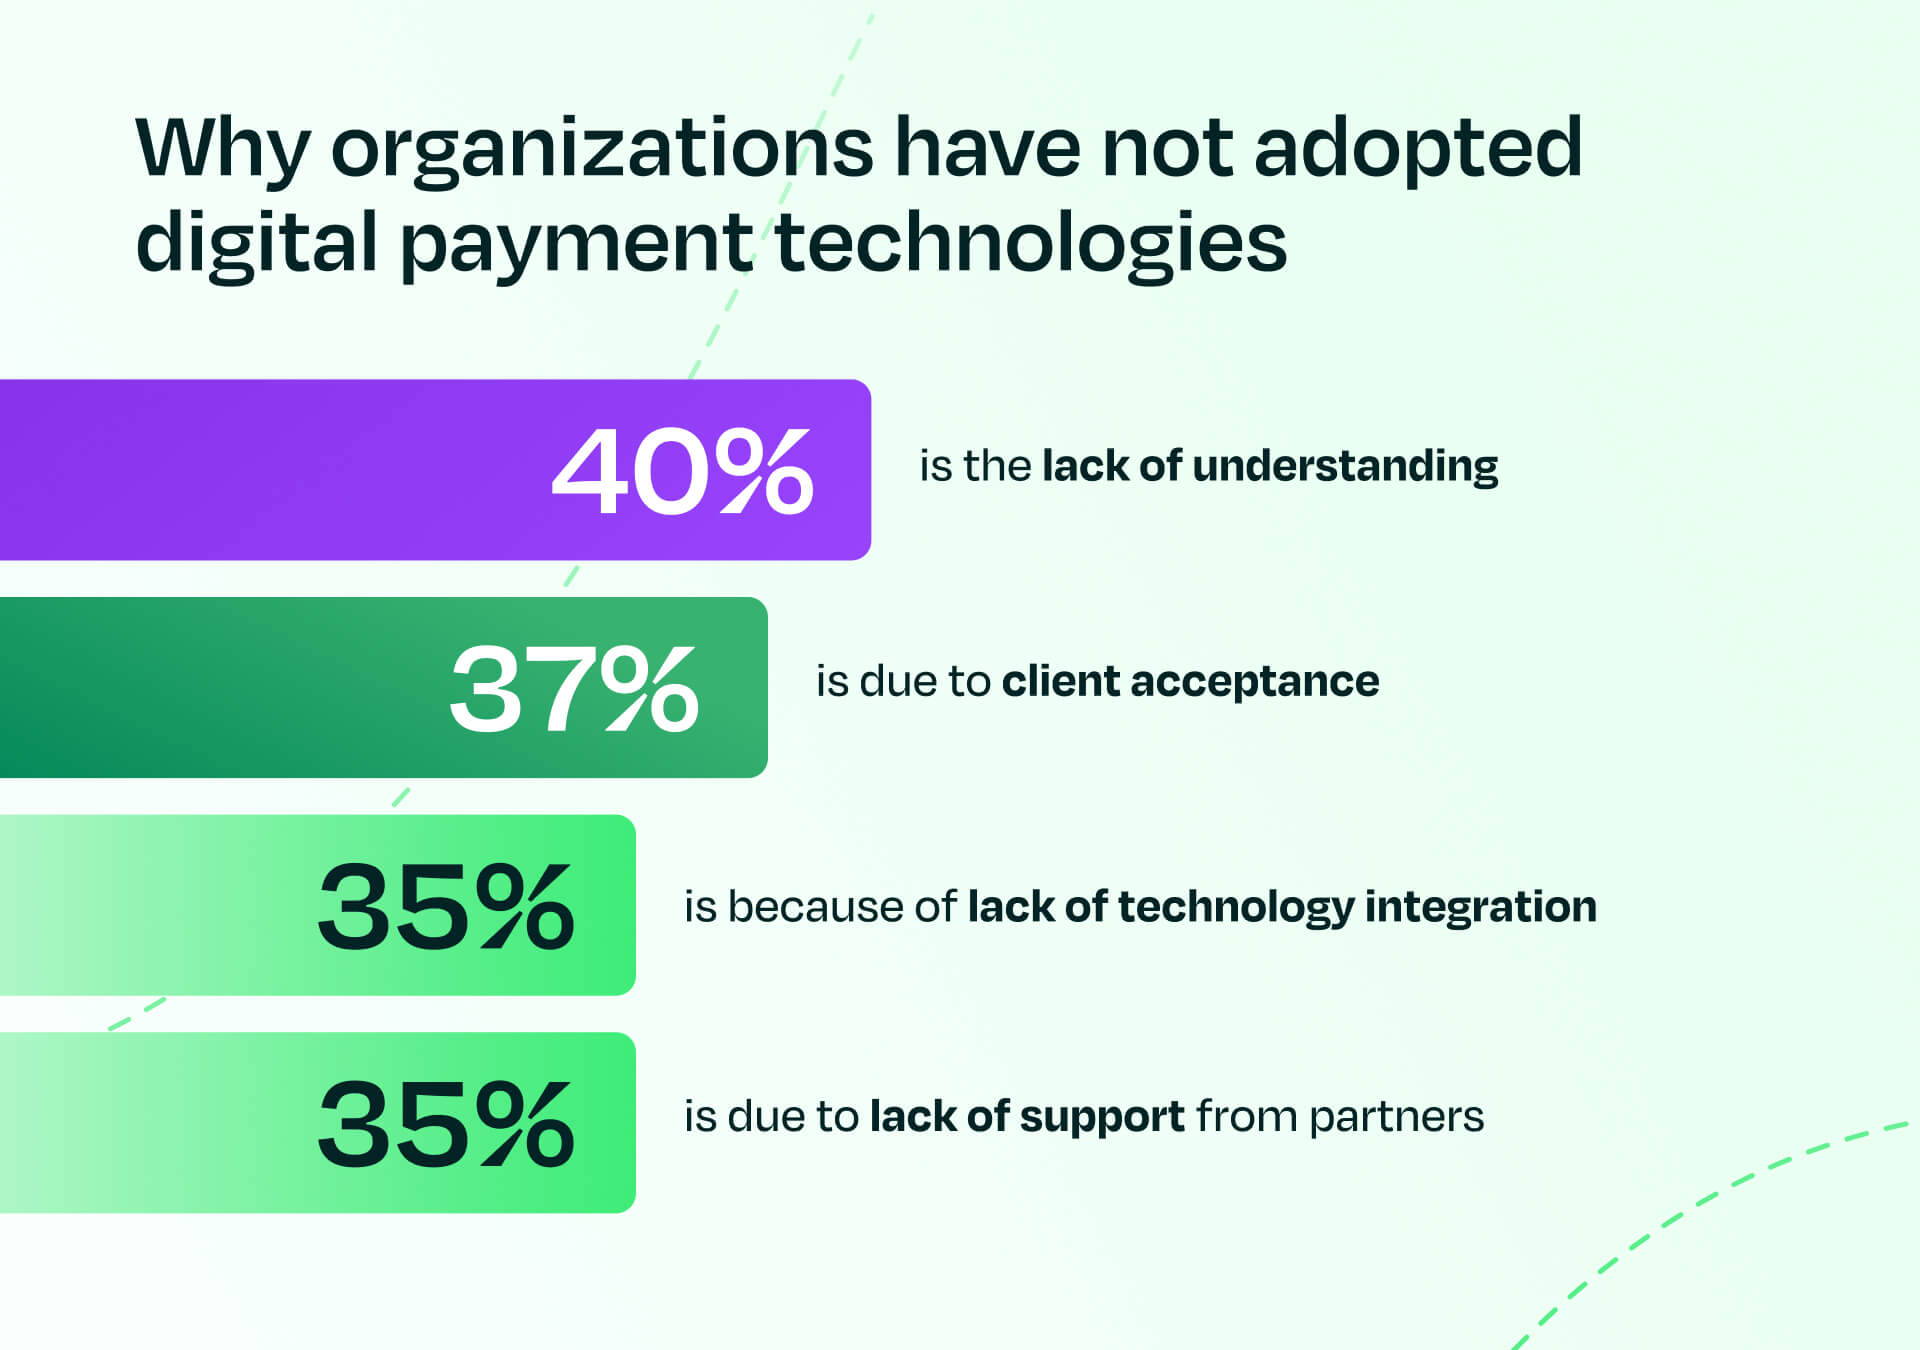 Why organizations have not adopted digital payment technologies stat chart